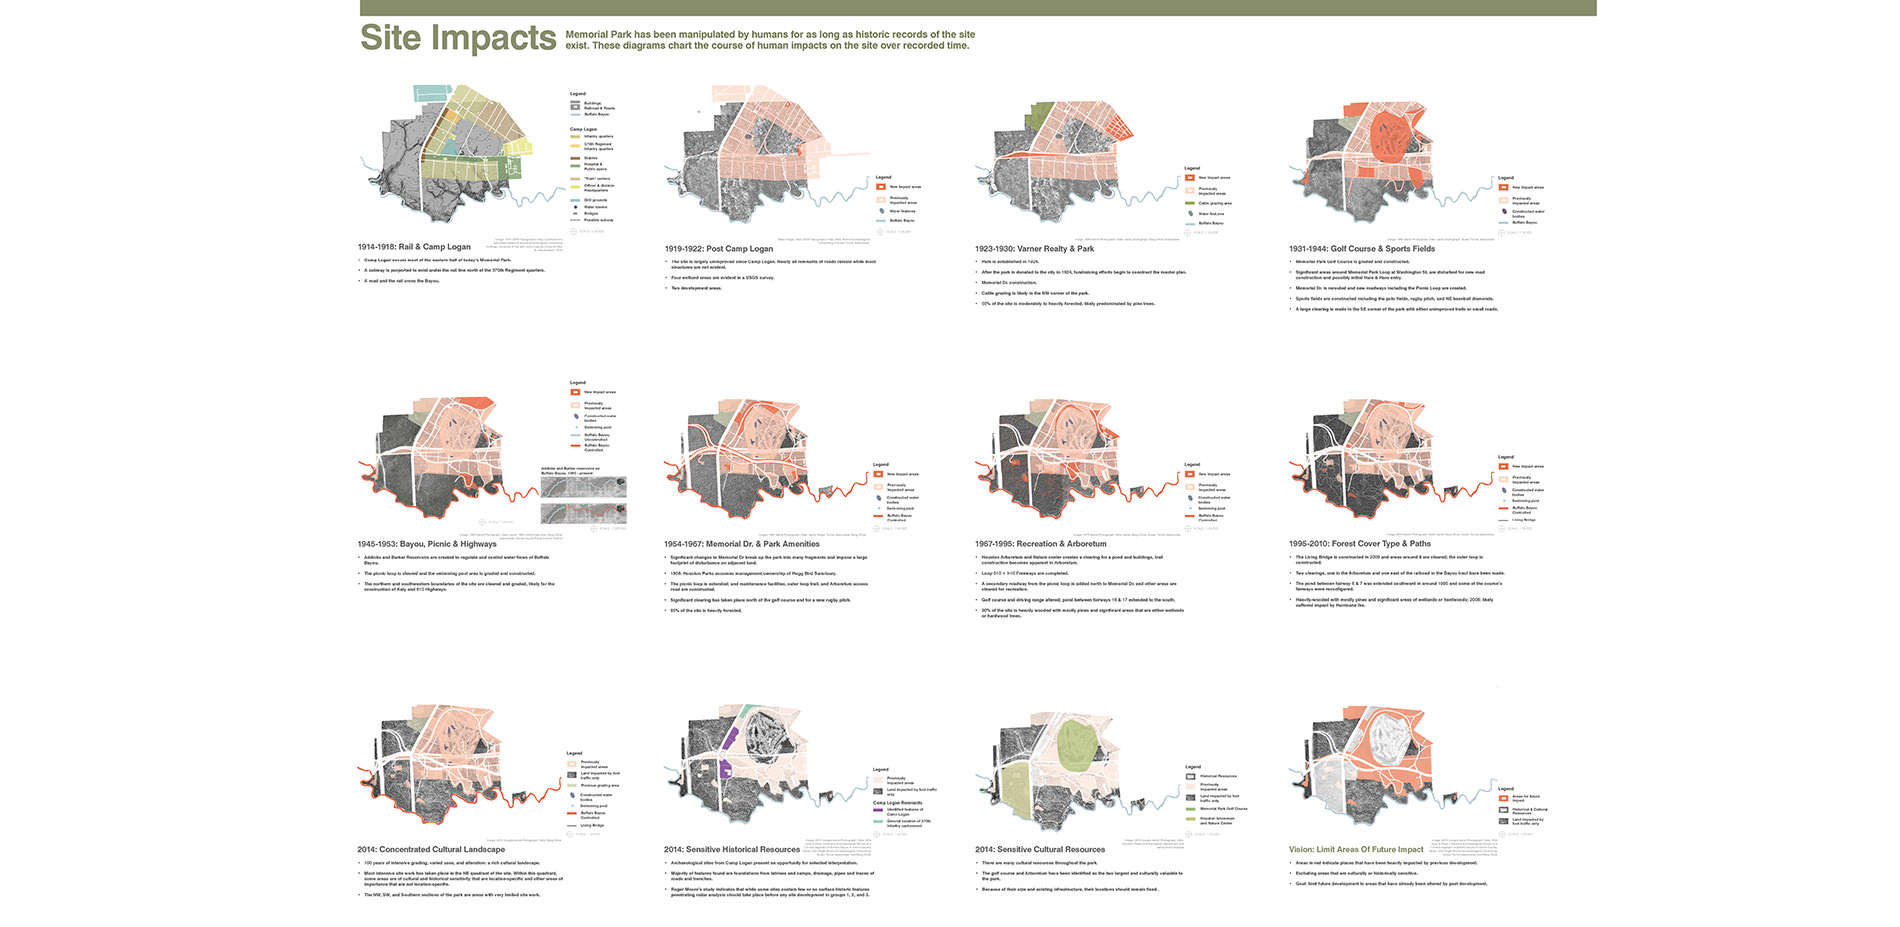 Illustrations of Site Impacts